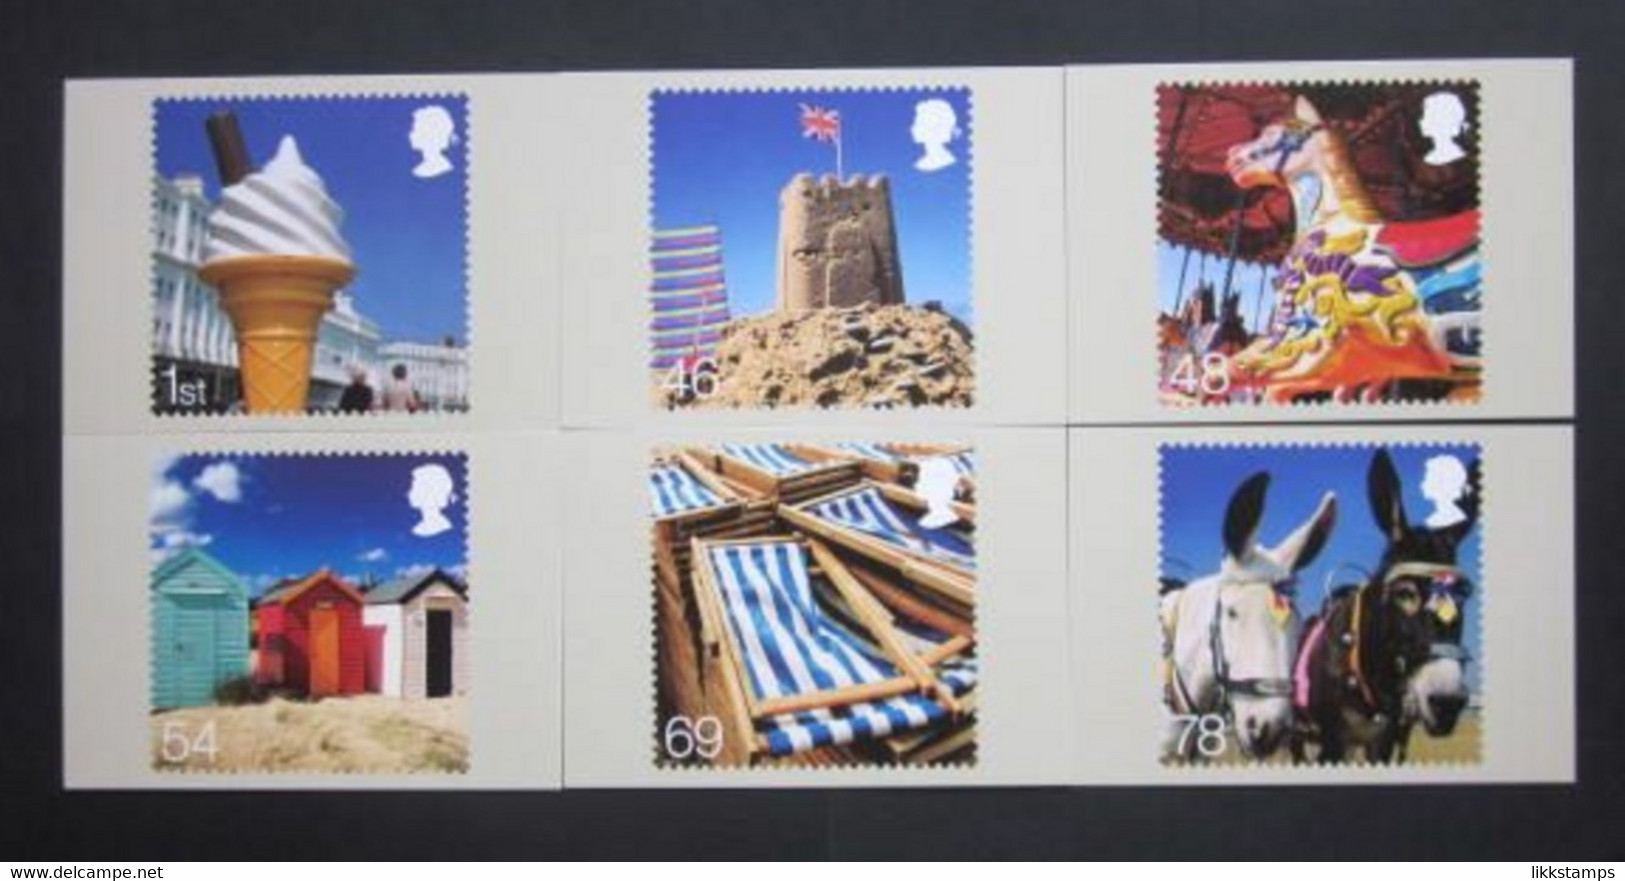 2007 'BESIDE THE SEASIDE' P.H.Q. CARDS UNUSED, ISSUE No. 298 (B) #00740 - Cartes PHQ